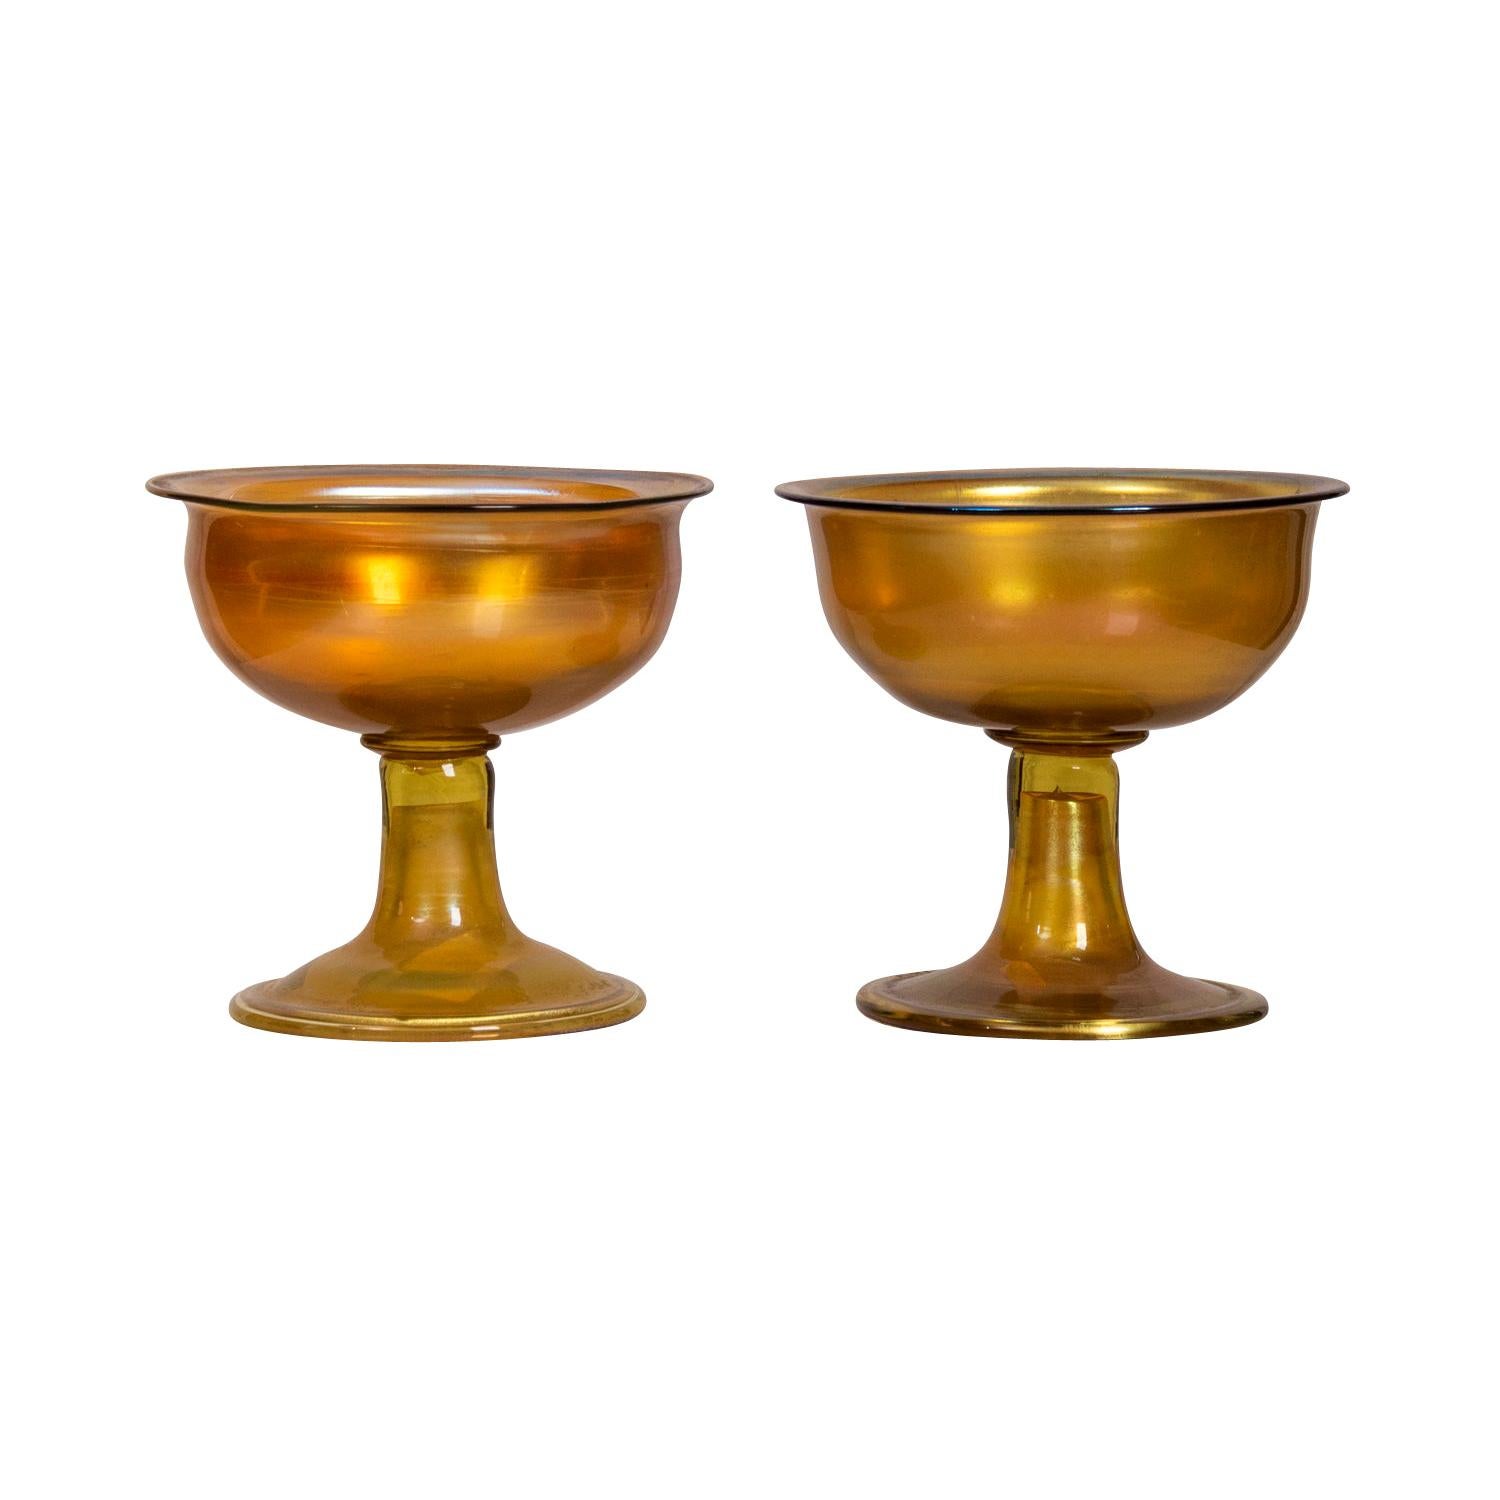 Pair of Tiffany Studios Gold Favrile Glass Sherbets For Sale